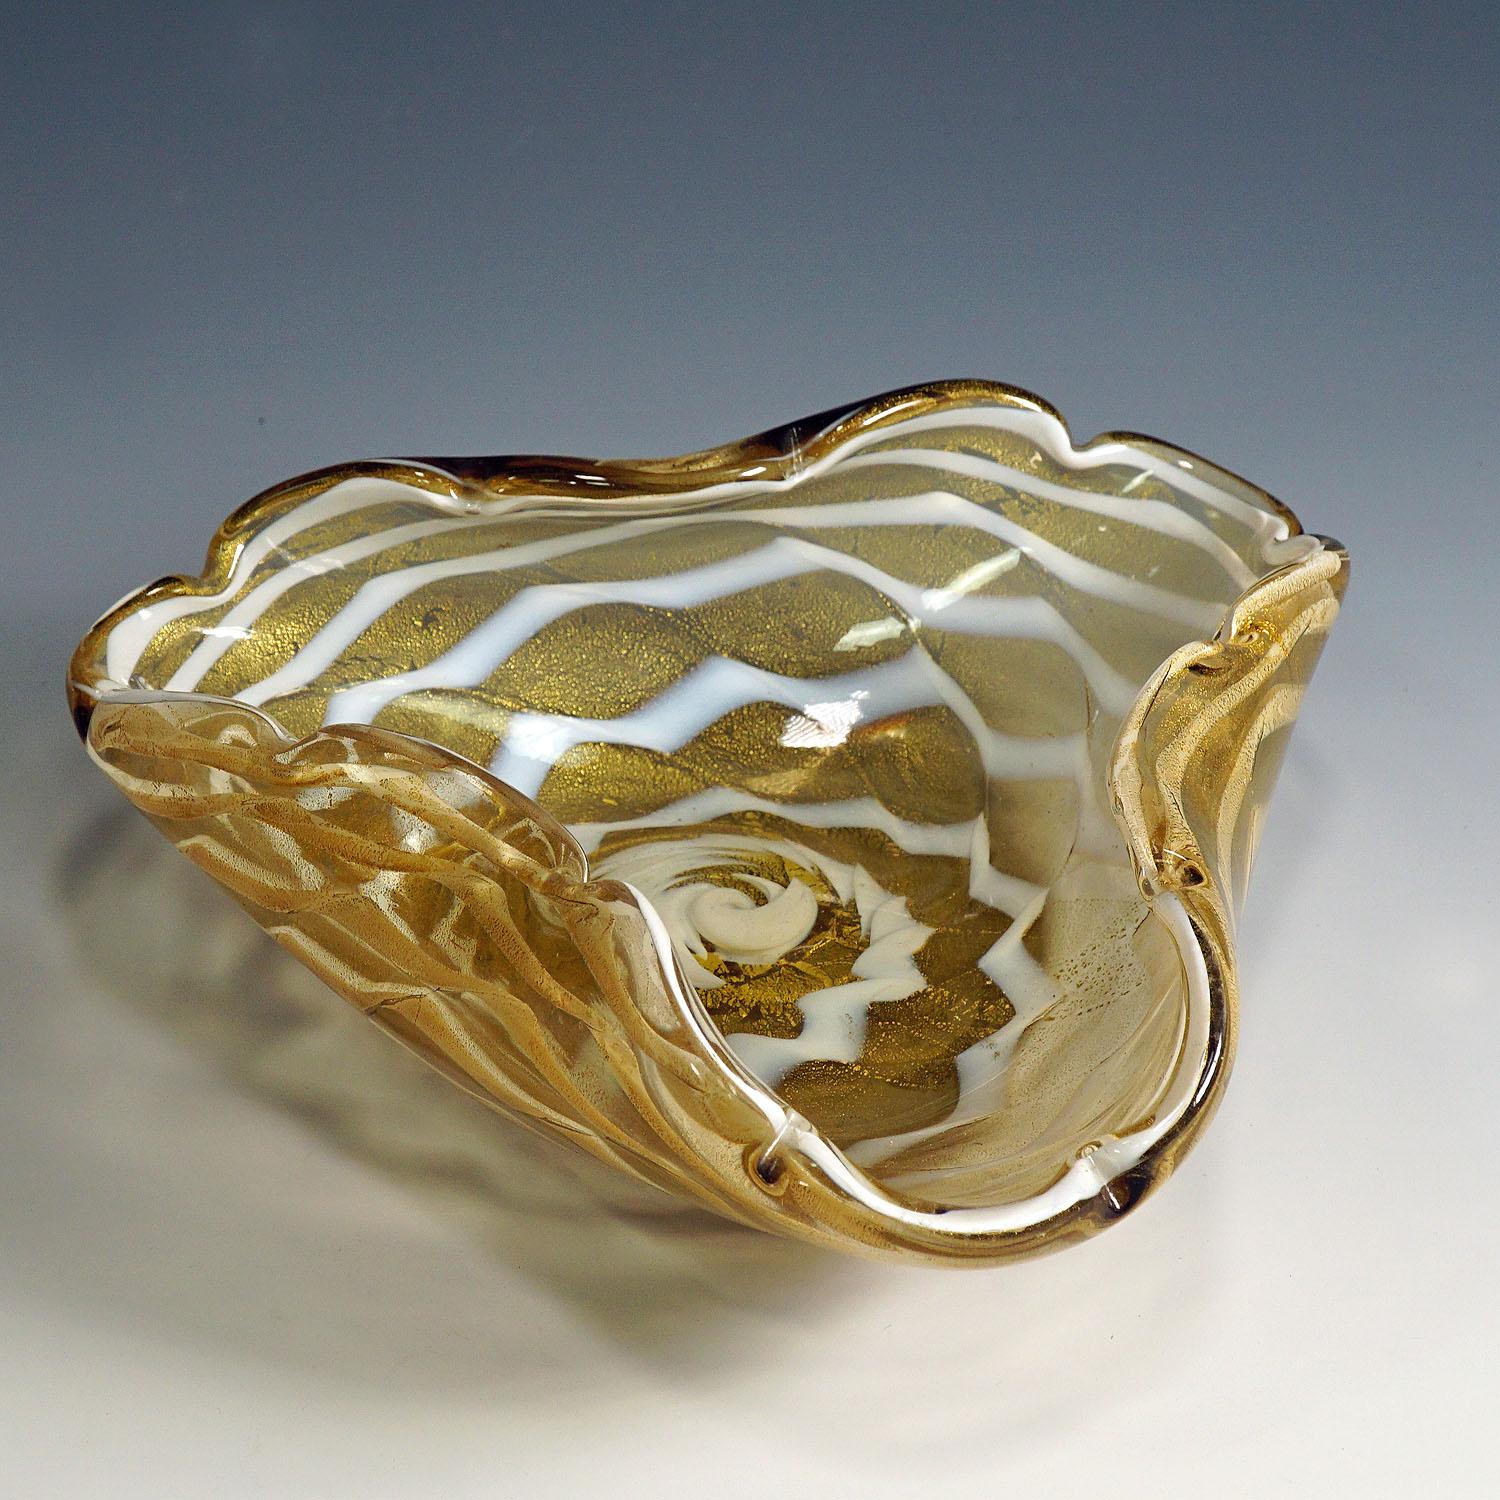 Ercole Barovier - Ferro Toso Barovier Bowl ca. 1936

A nice glass bowl manufactured by Ferro Toso Barovier ca. 1936, Murano Italy. Honey yellow glass with gold foil inclusion and a ondulating white glass spiral.

Measures:
Height: 2.17